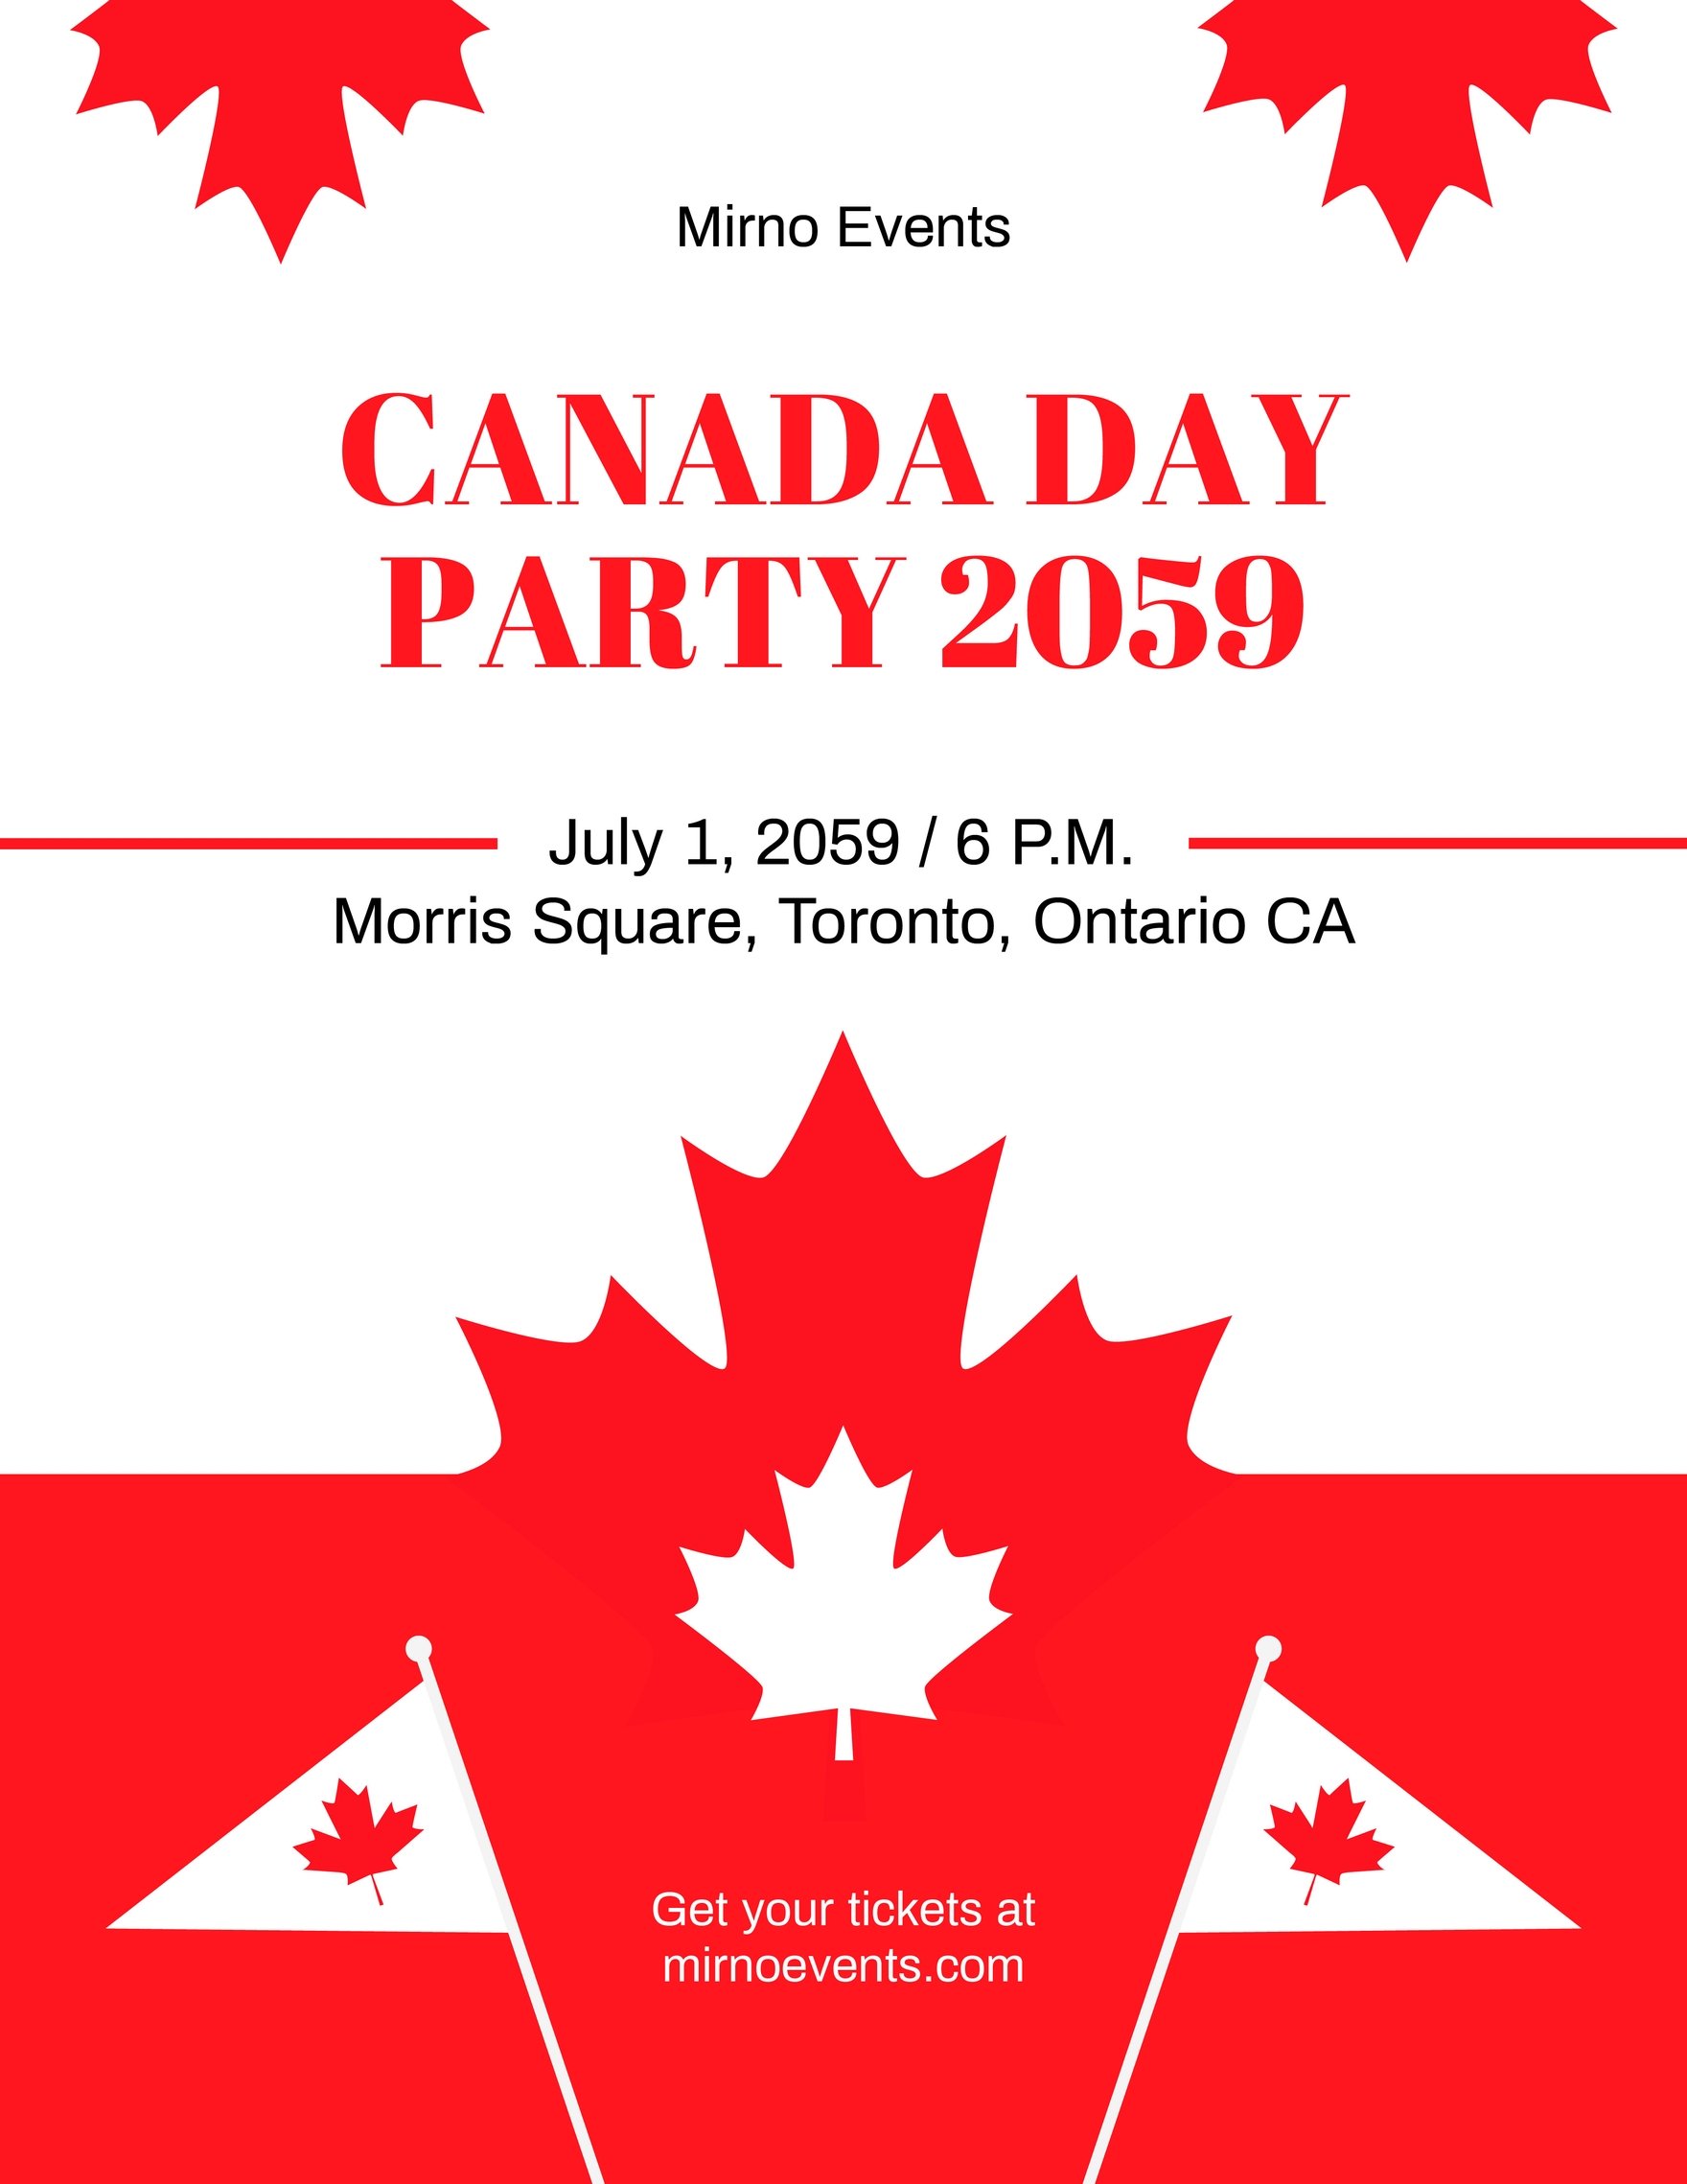 Free Canada Day Event Flyer Template in Word, Google Docs, Illustrator, PSD, Apple Pages, Publisher